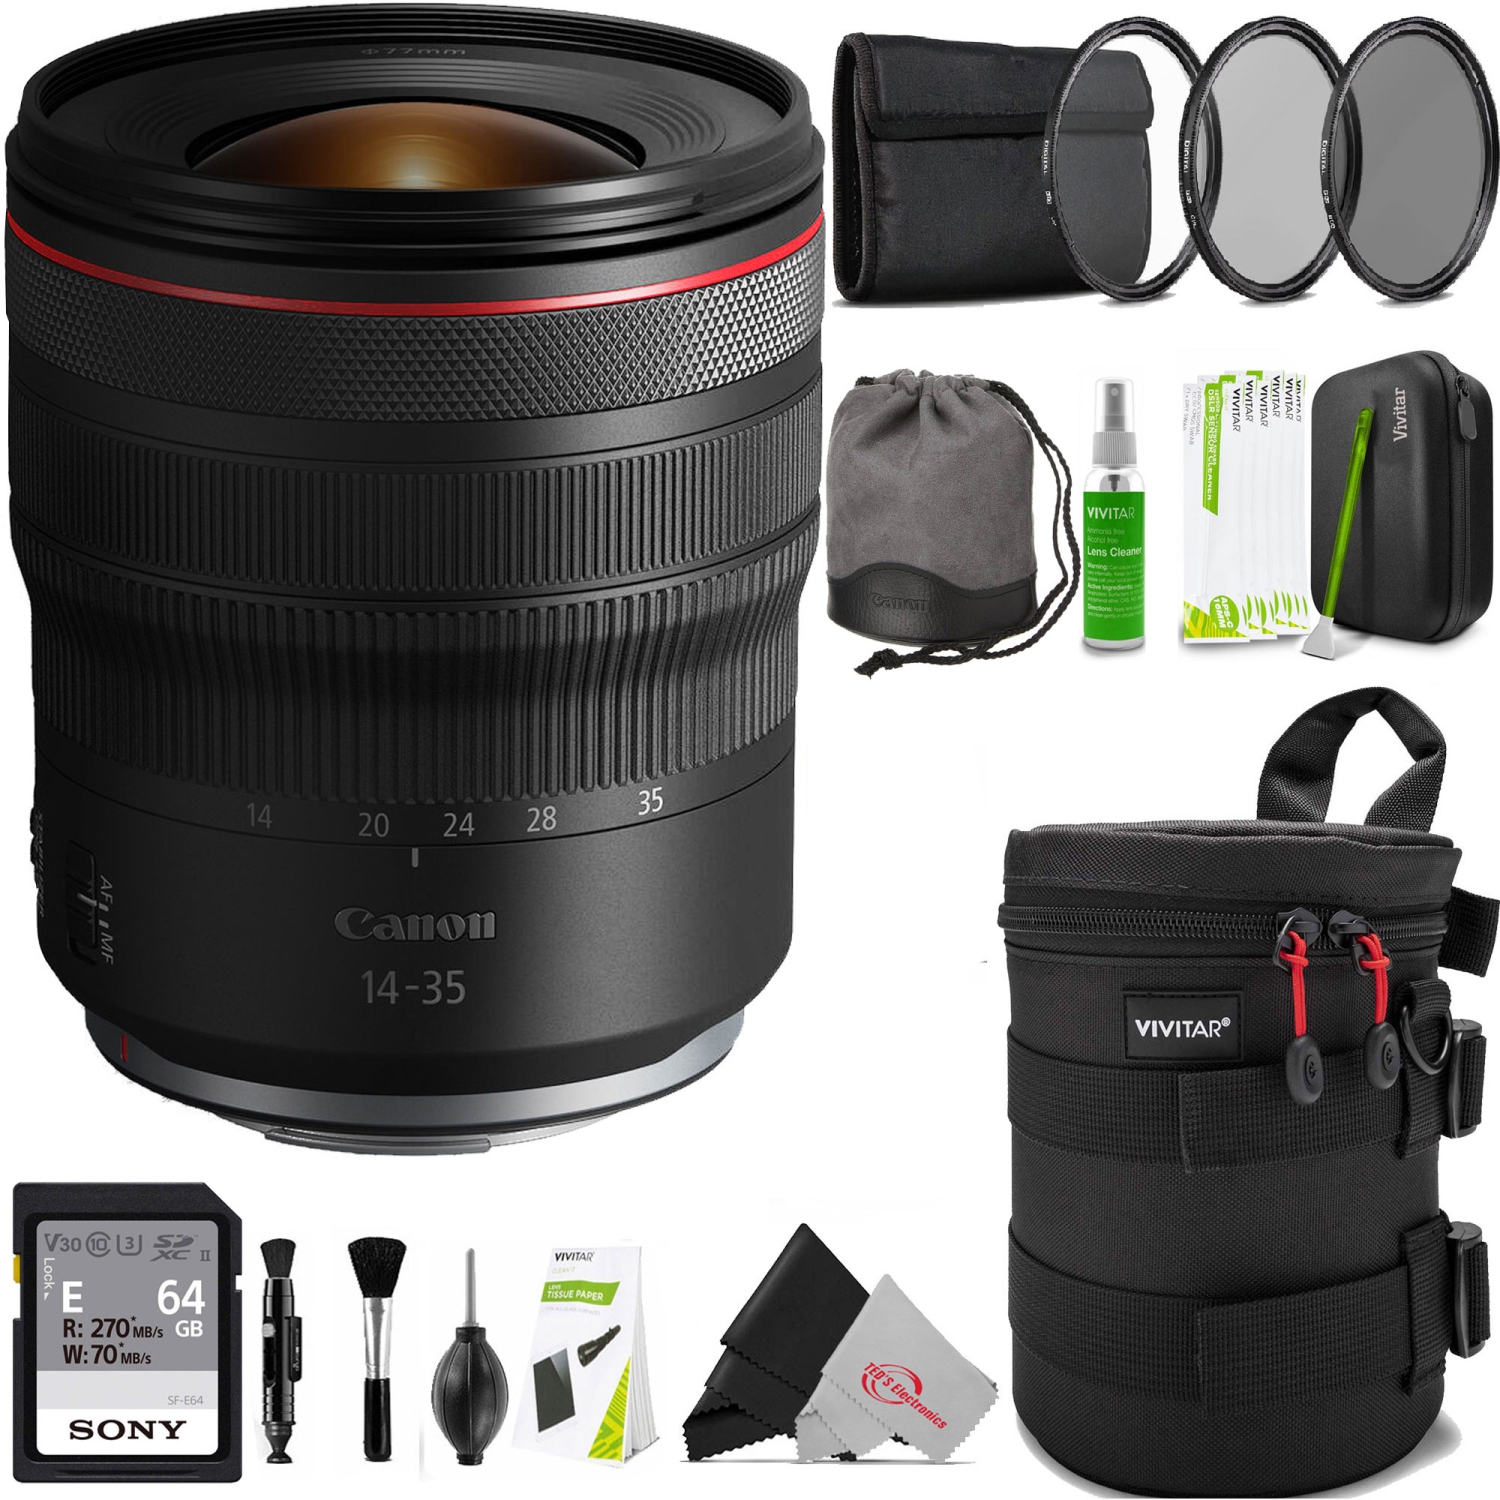 Canon RF 14-35mm f/4 L IS USM Lens with Filter Kit Top Bundle